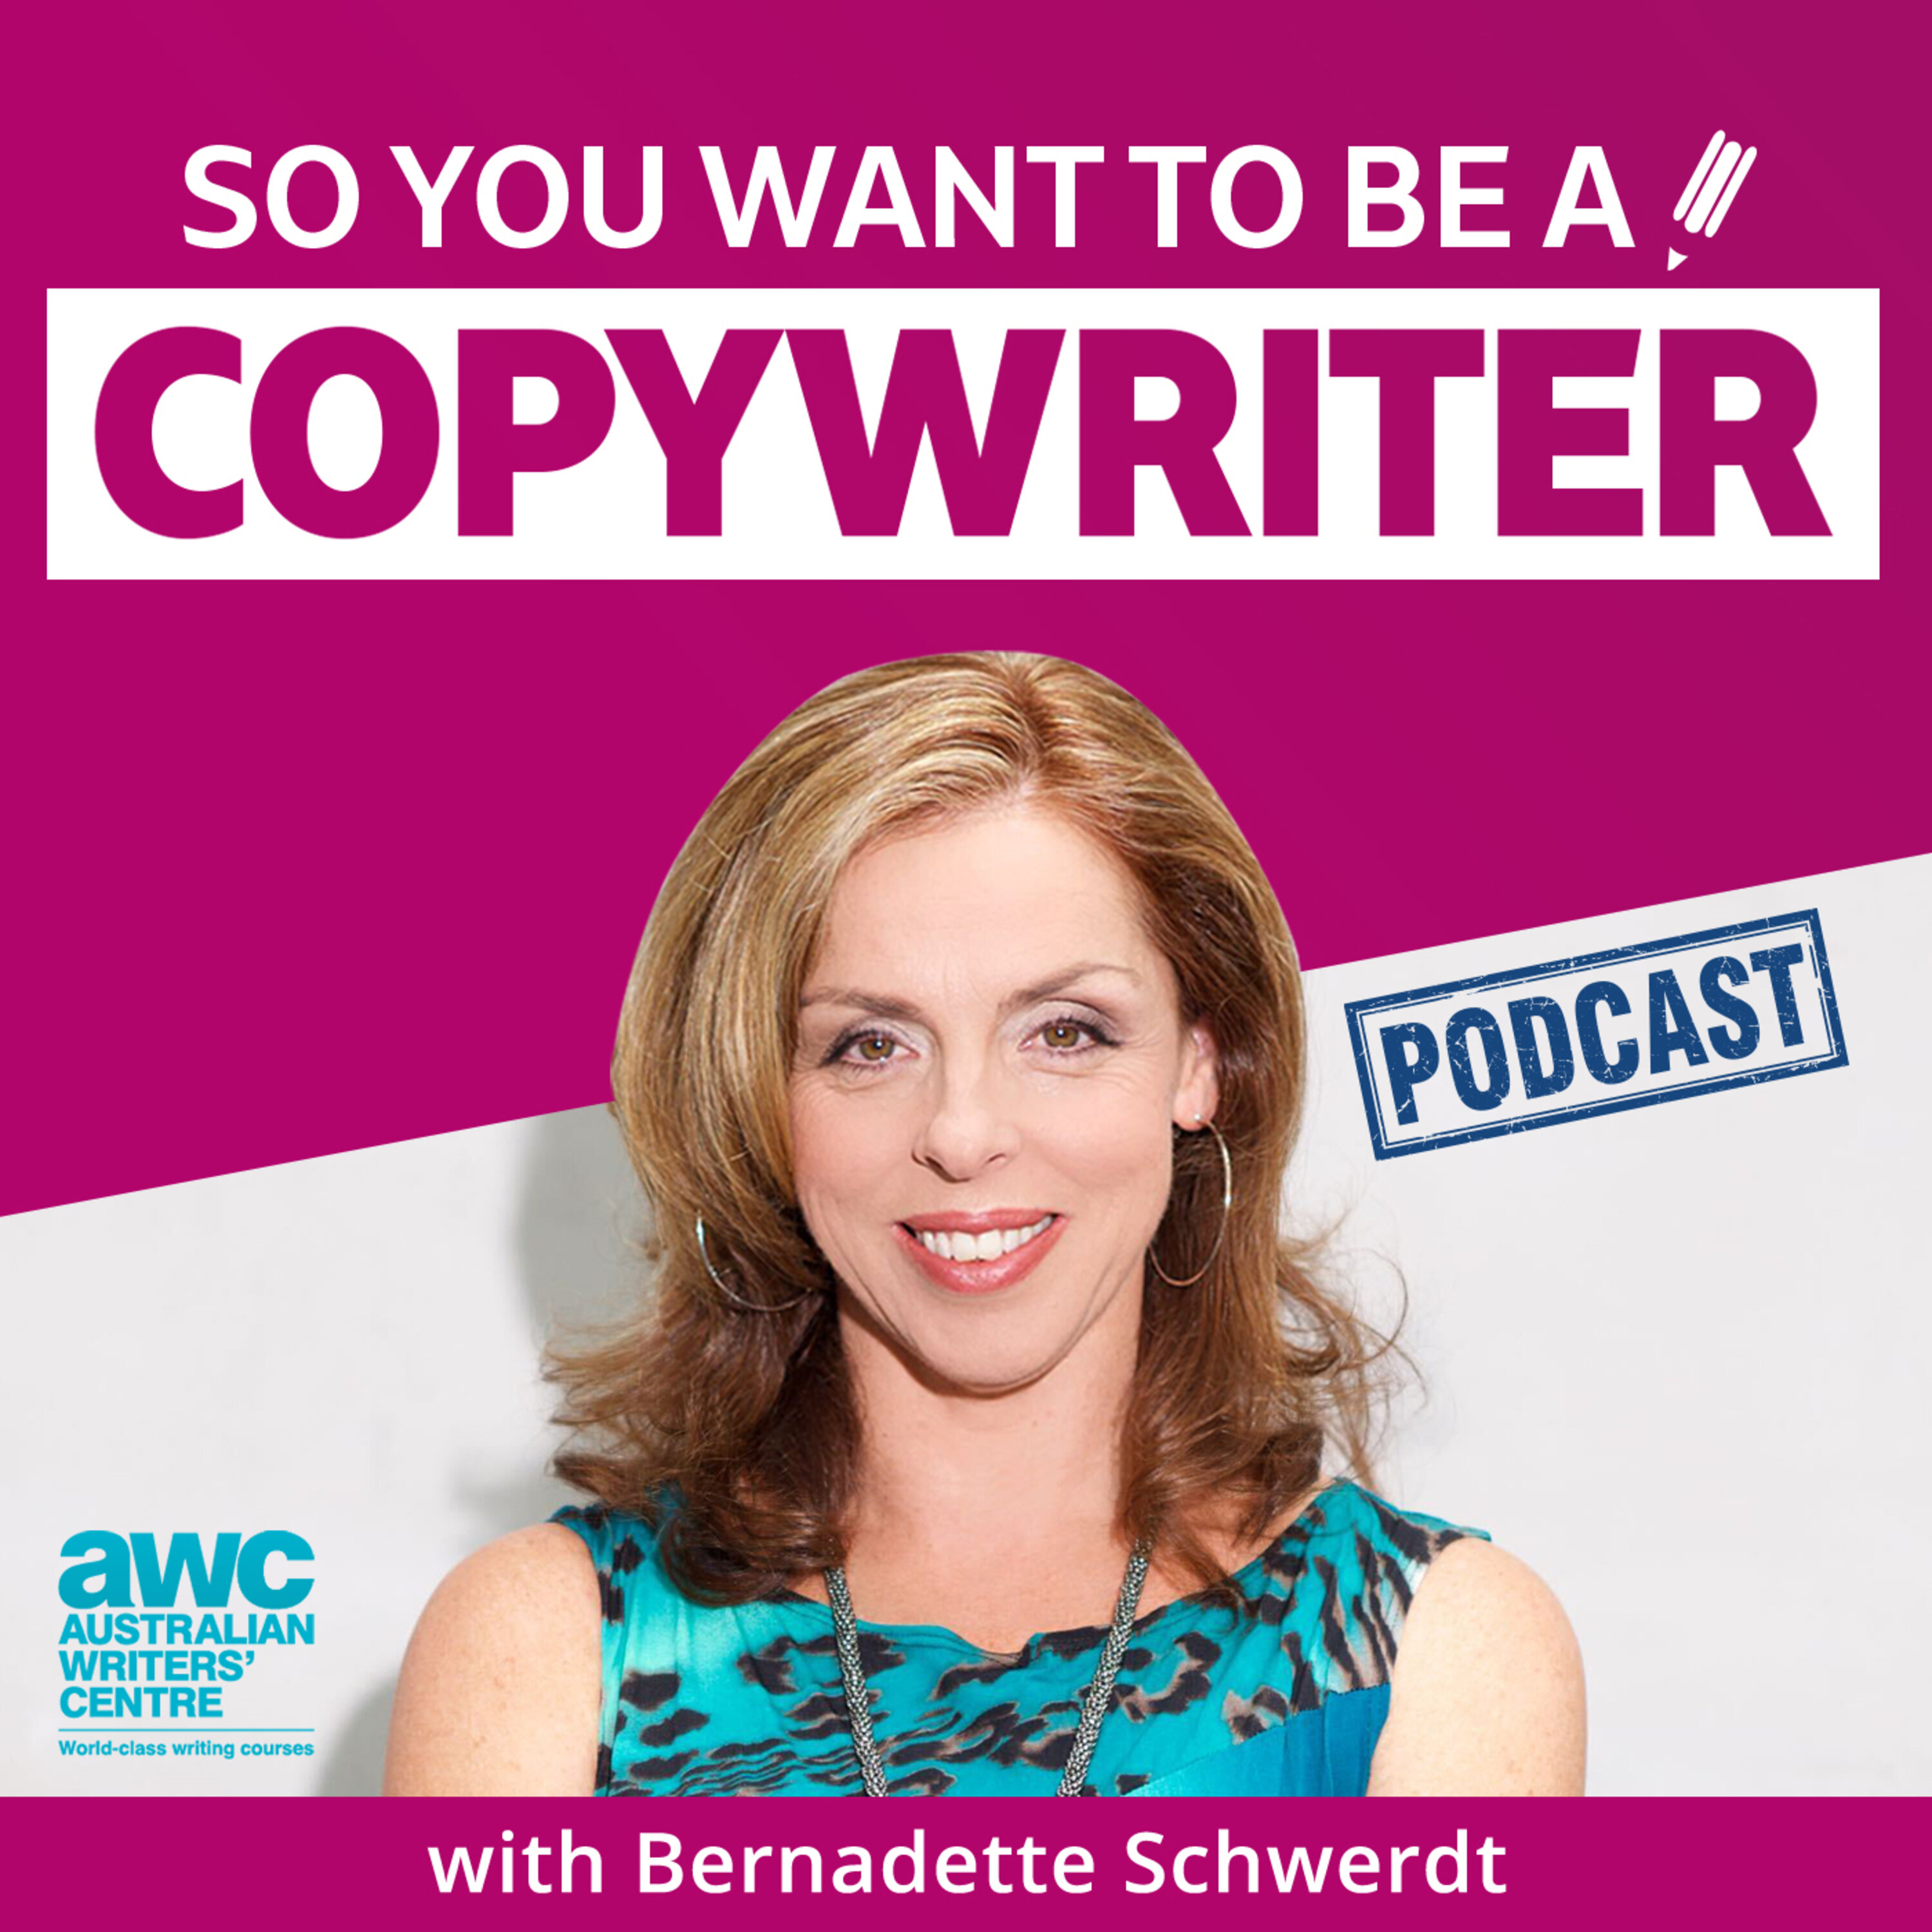 So you want to be a copywriter with Bernadette Schwerdt